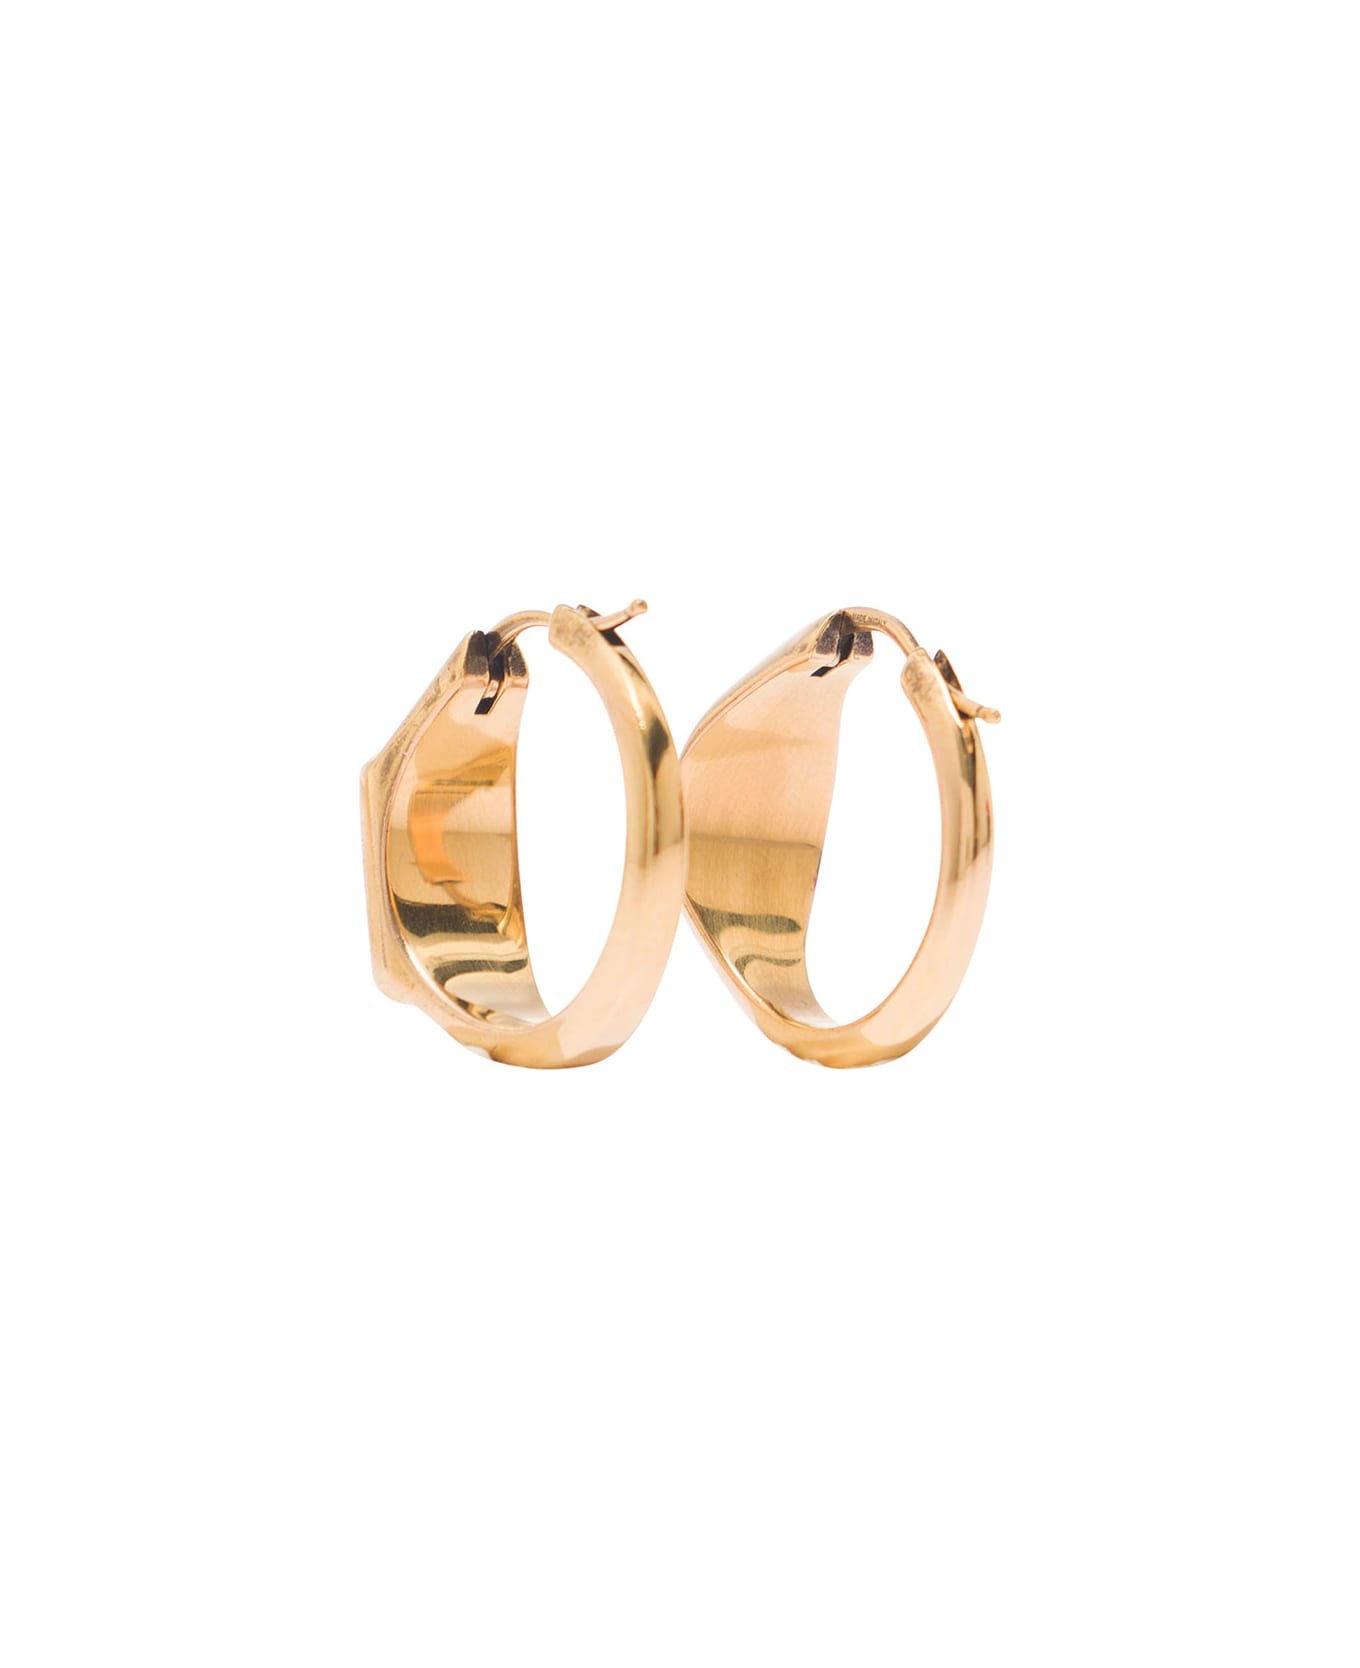 Alexander McQueen Gold-colored Hoops Earrings With Skull And Logo Engraved In Brass Woman - Metallic イヤリング